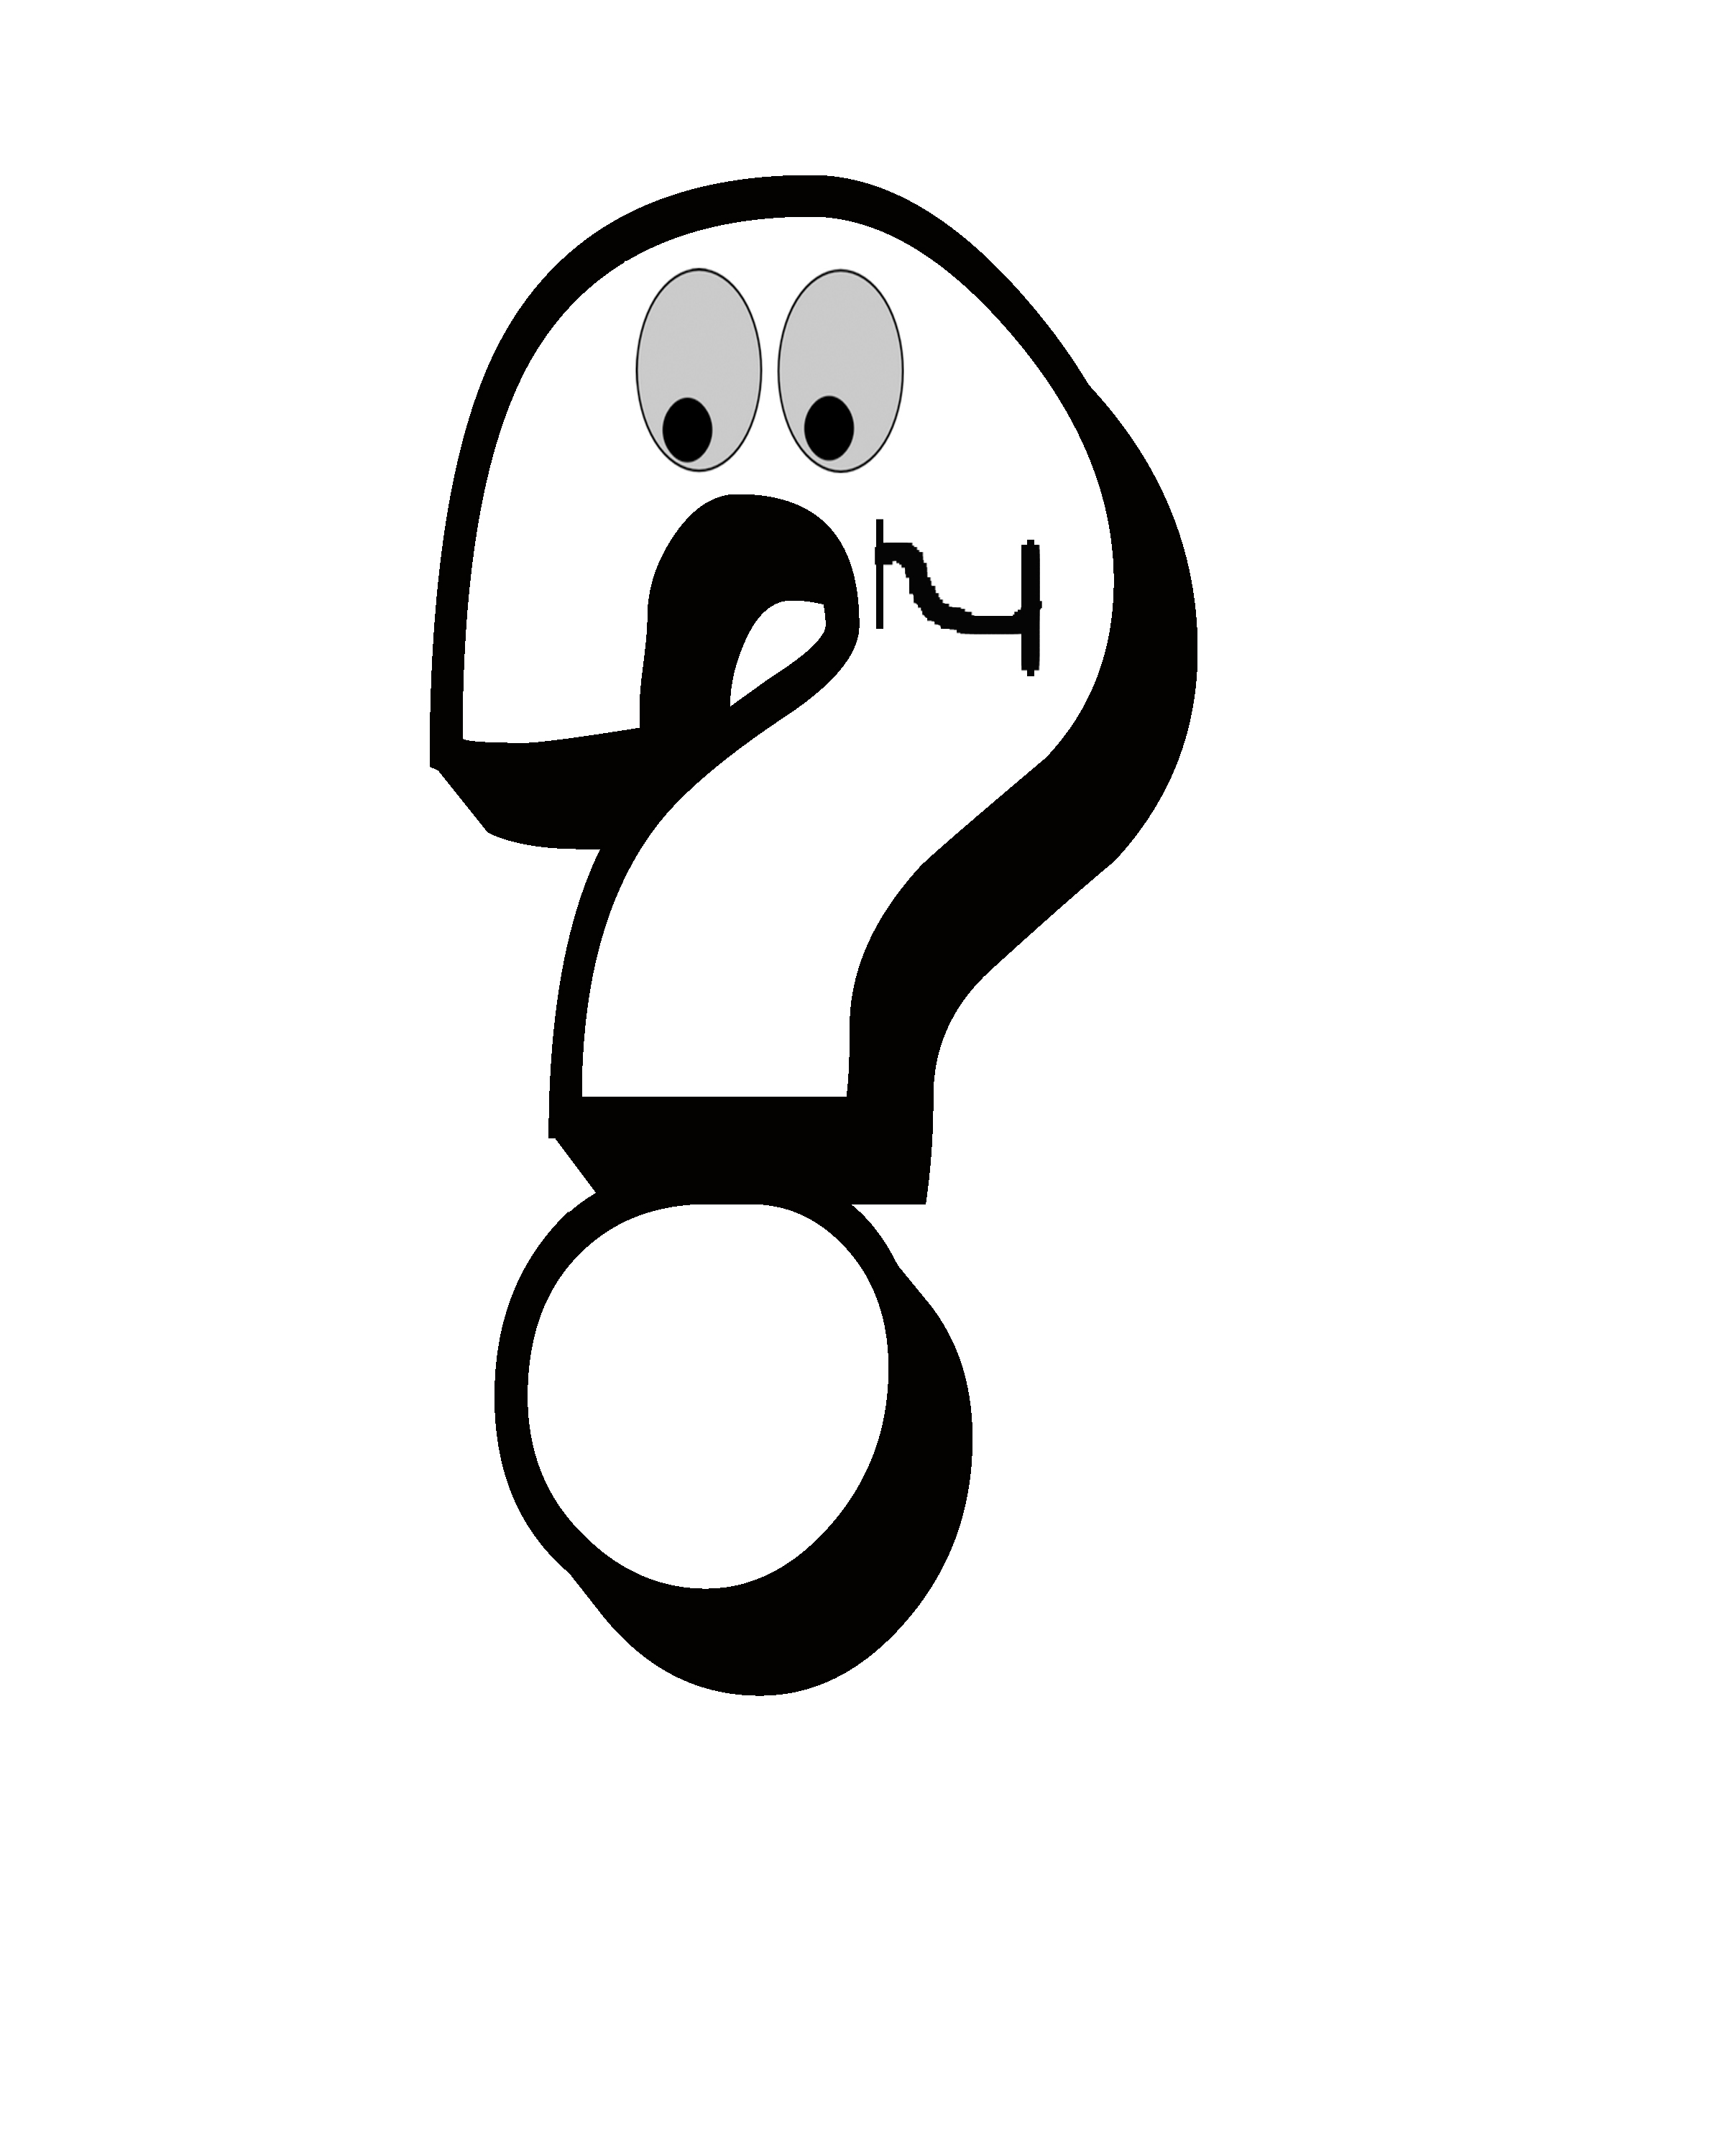 Printable Question Mark - ClipArt Best